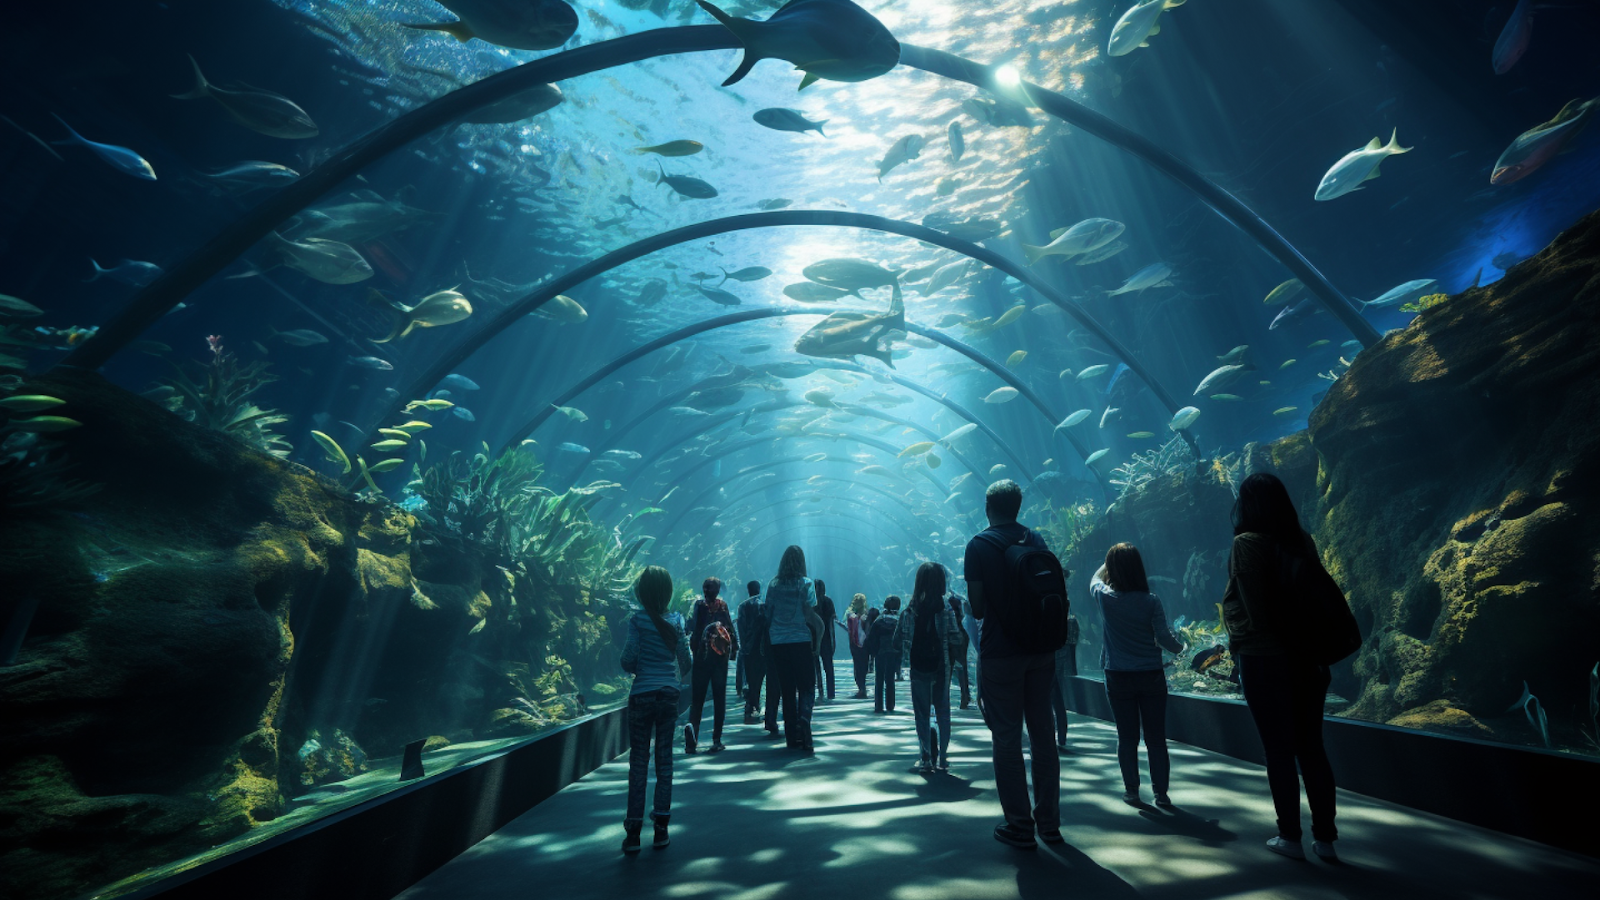 Spectators immersed in the underwater viewing tunnel at the Oceanogràfic aquarium in the City of Arts and Sciences in Valencia, Spain.